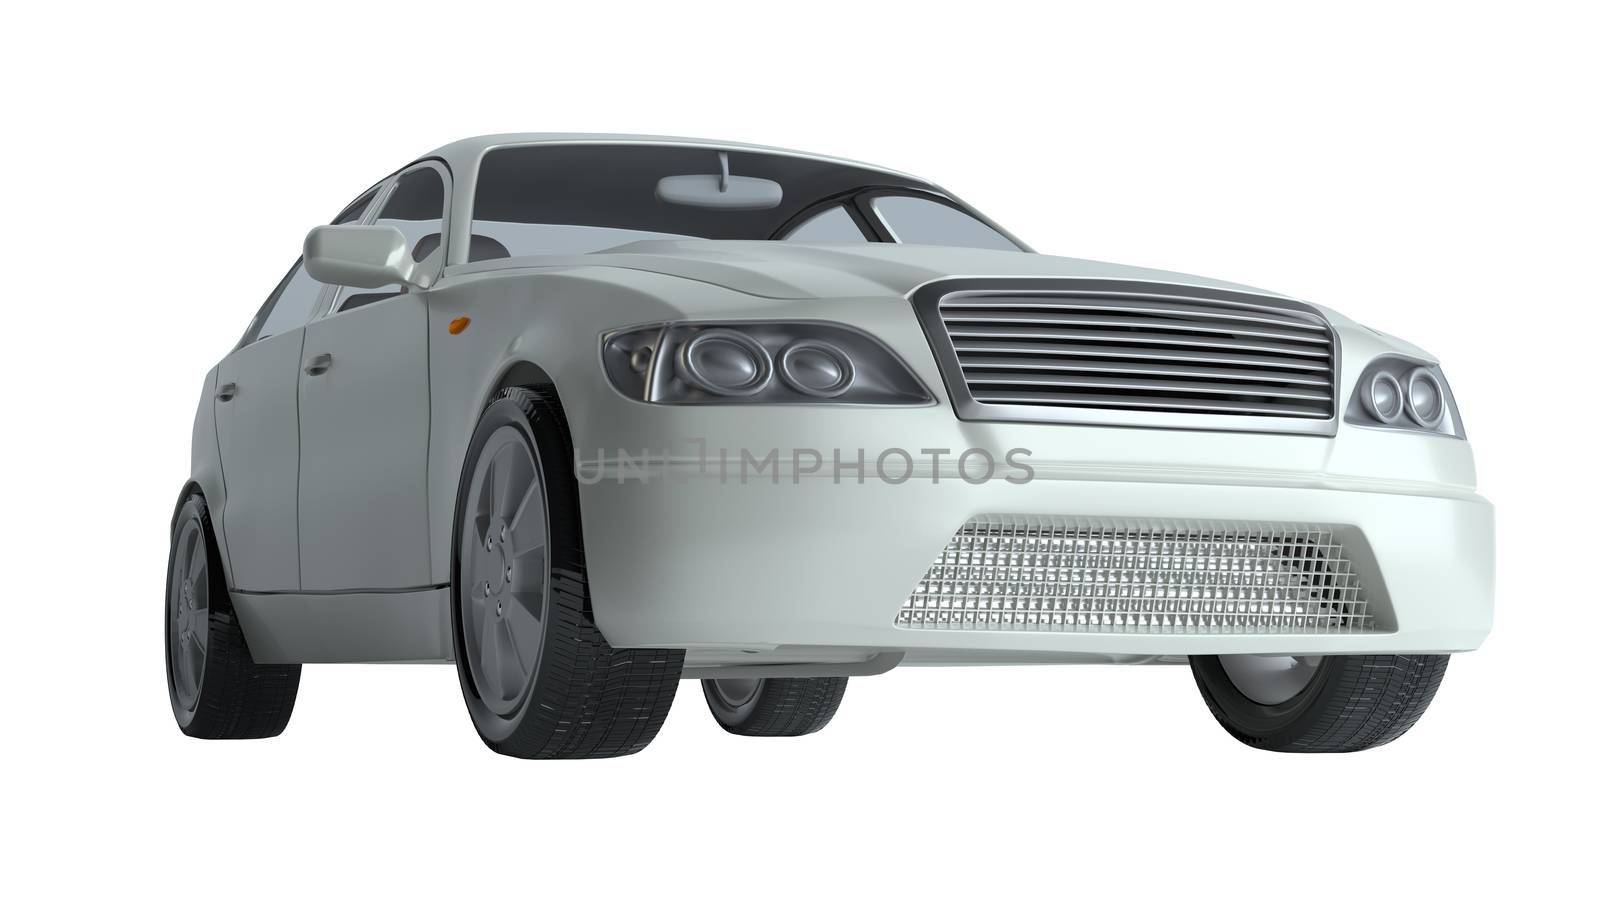 Generic brandless sports car. Isolated on white. 3d illustration